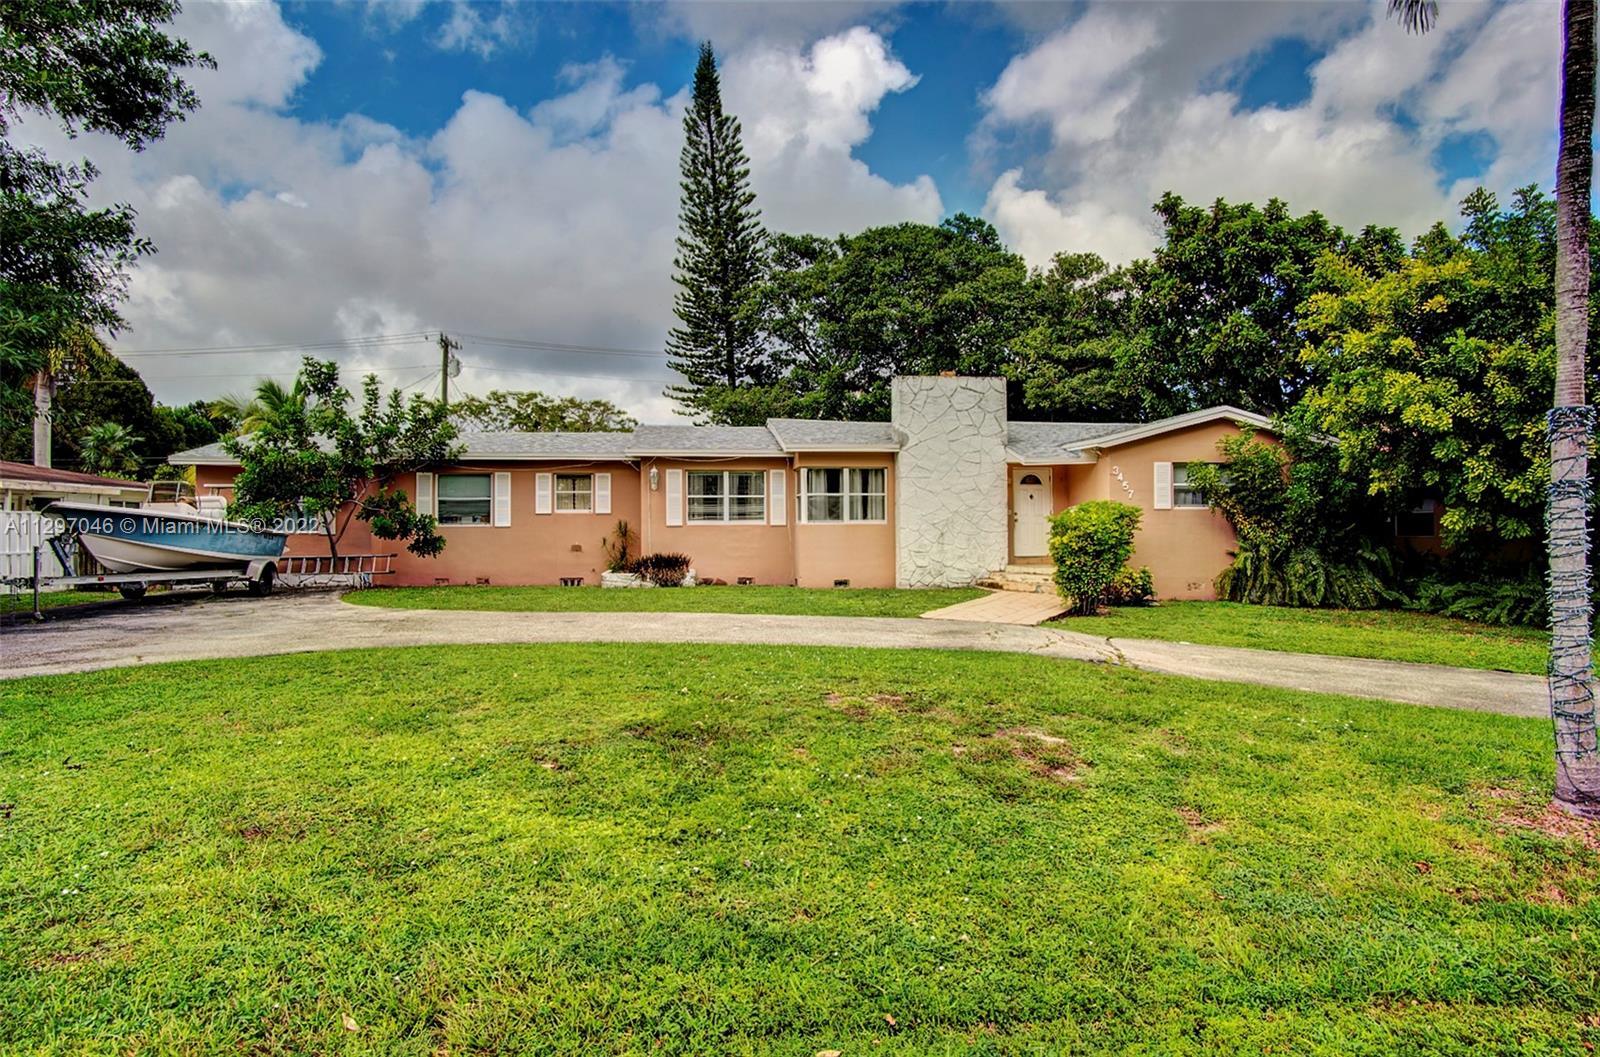 This Hollywood Hills 3 Bedroom 2 Bath home with a very large fenced yard sits on a 12,000+ Sq Ft.  L